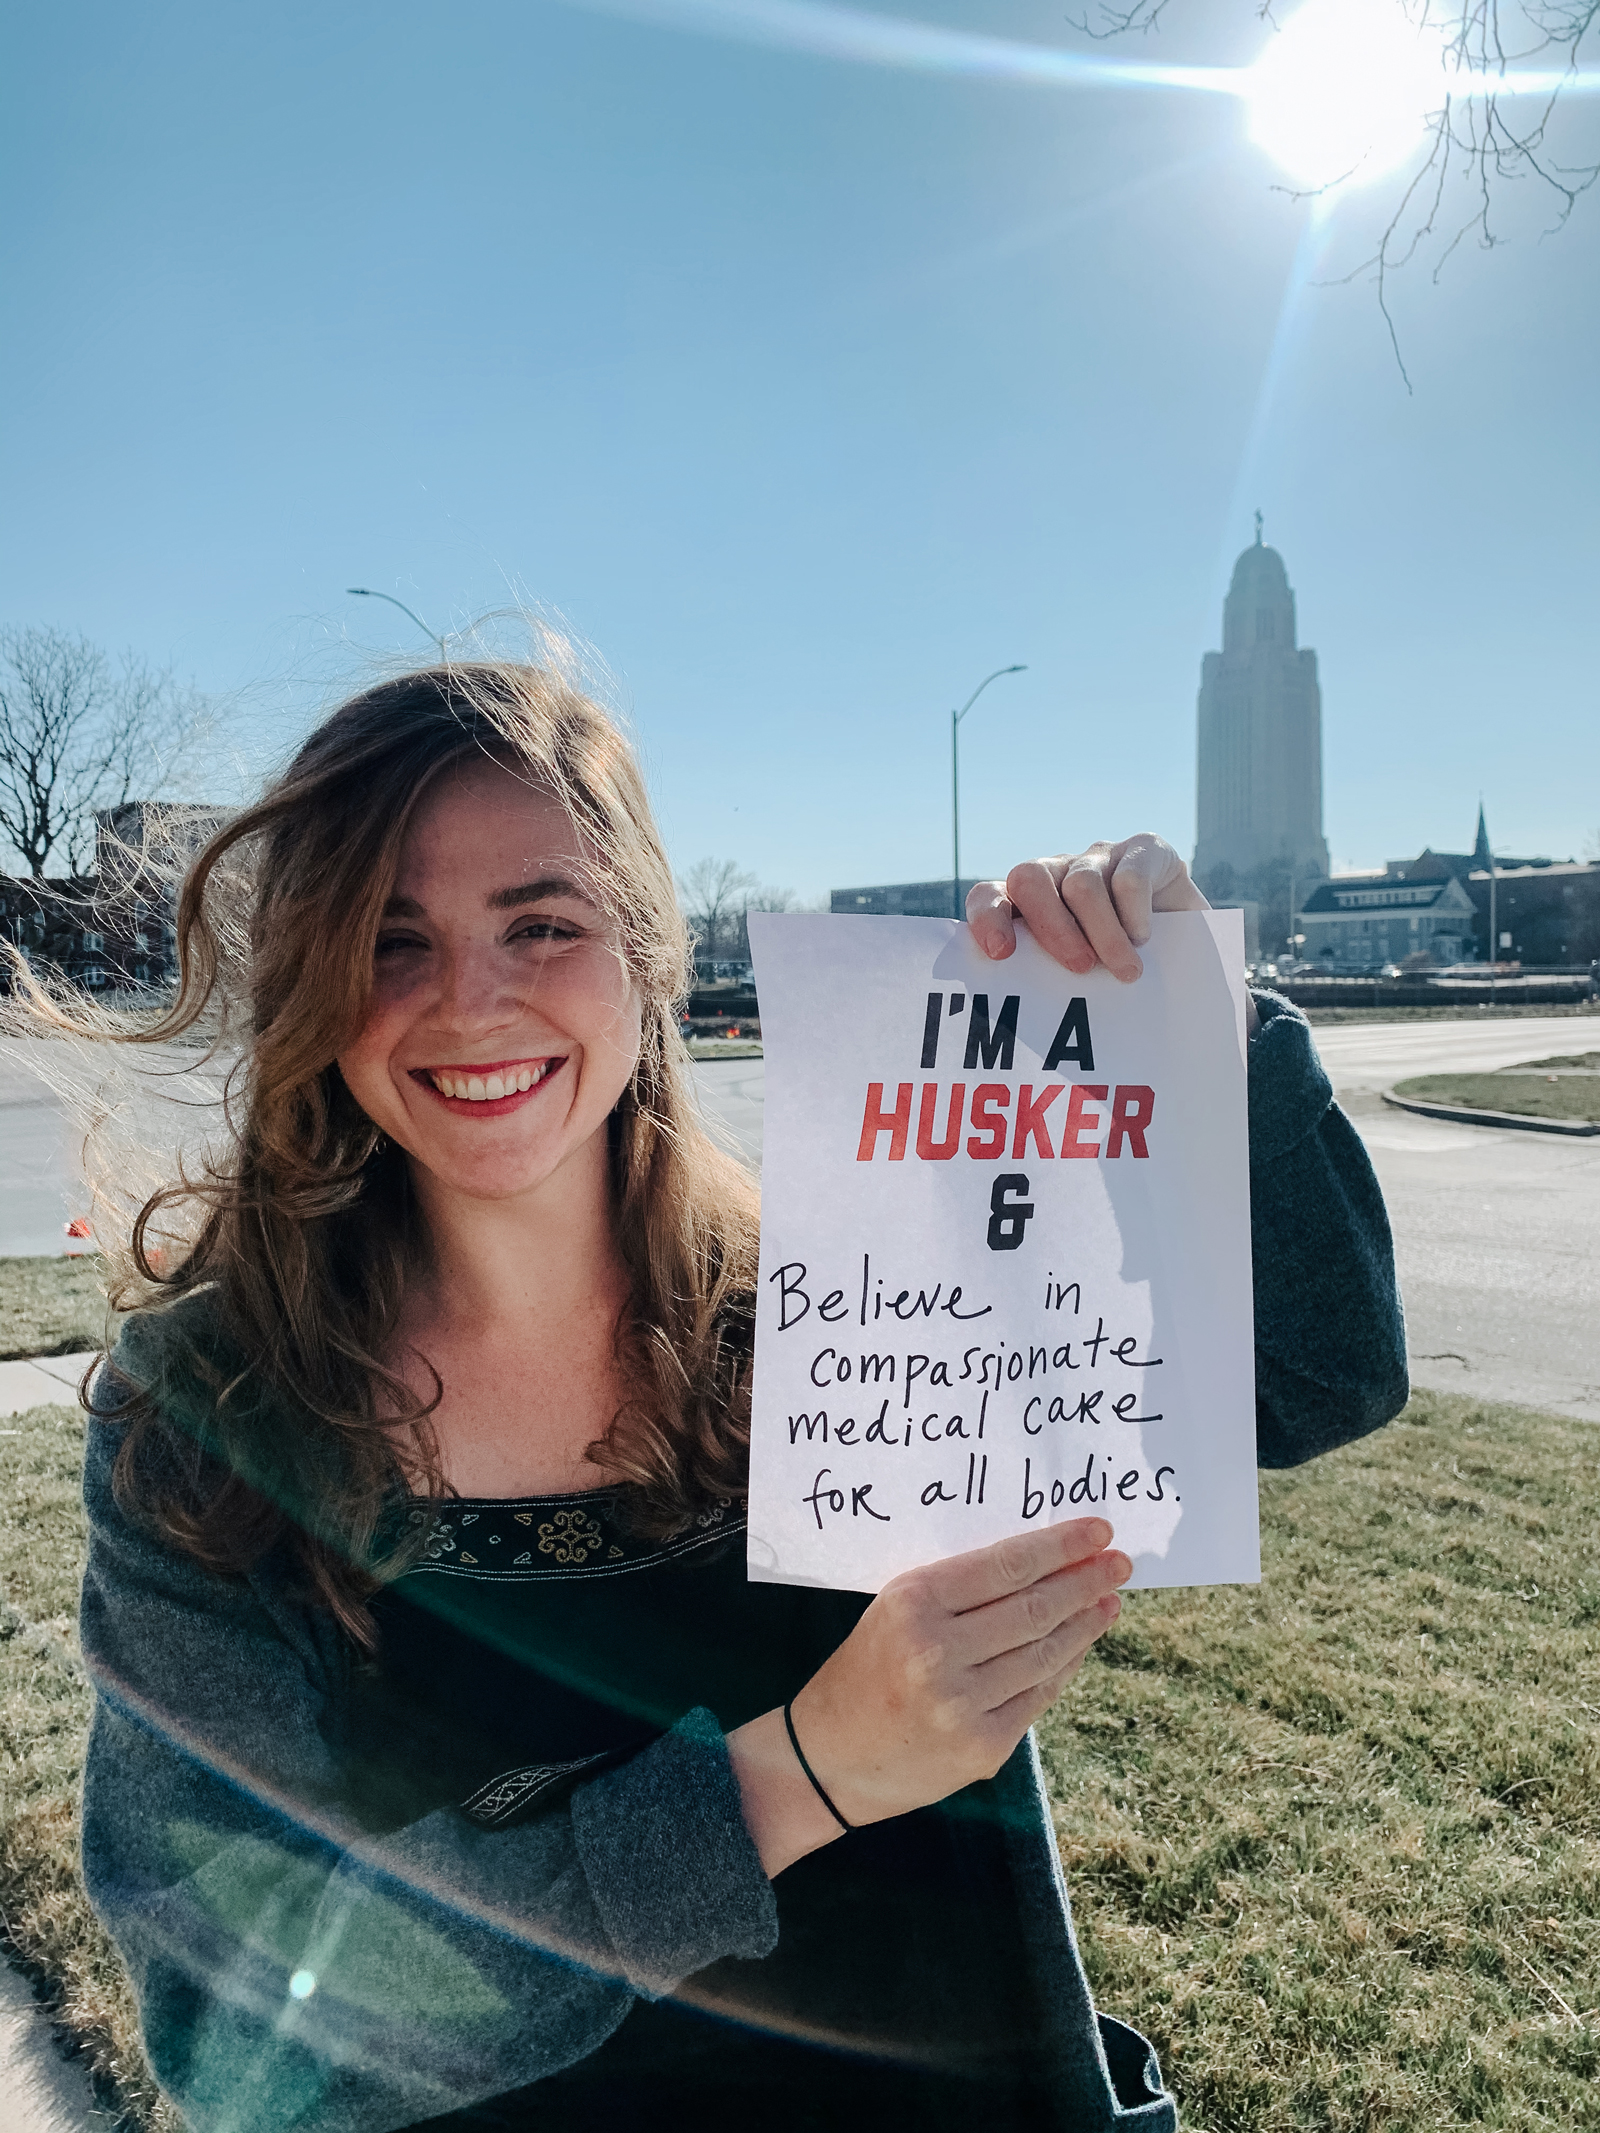 Jacqueline smiles for the camera with the Capitol in the background. She holds a sign that says “I’m a Husker & I believe in compassionate medical care for all bodies”